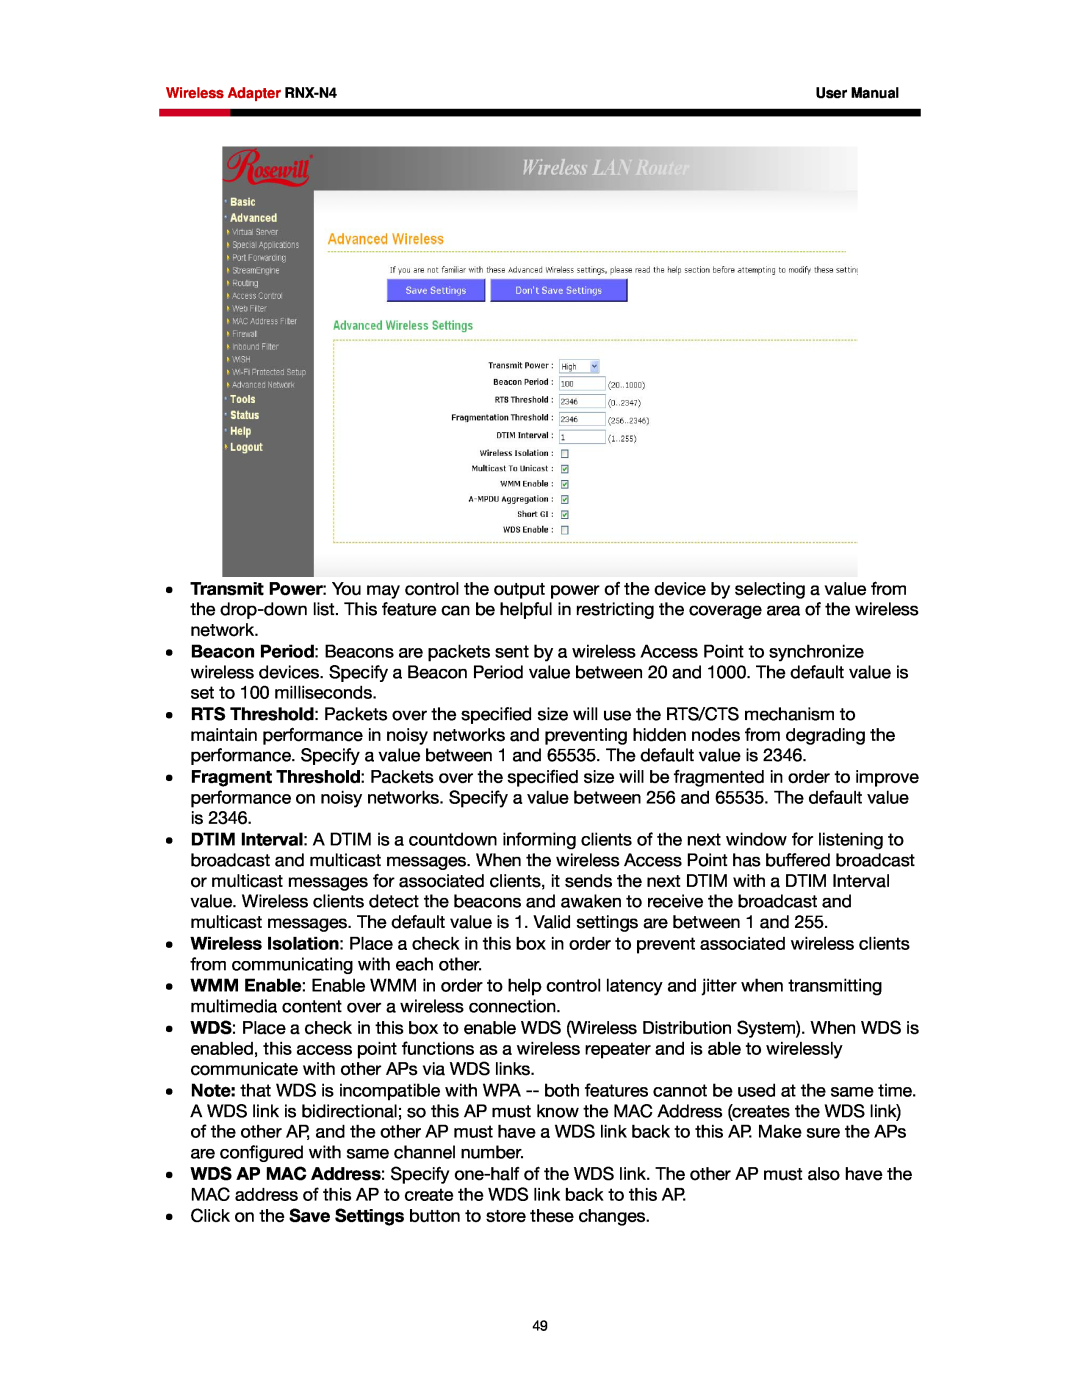 Rosewill RNX-N4 user manual Click on the Save Settings button to store these changes 